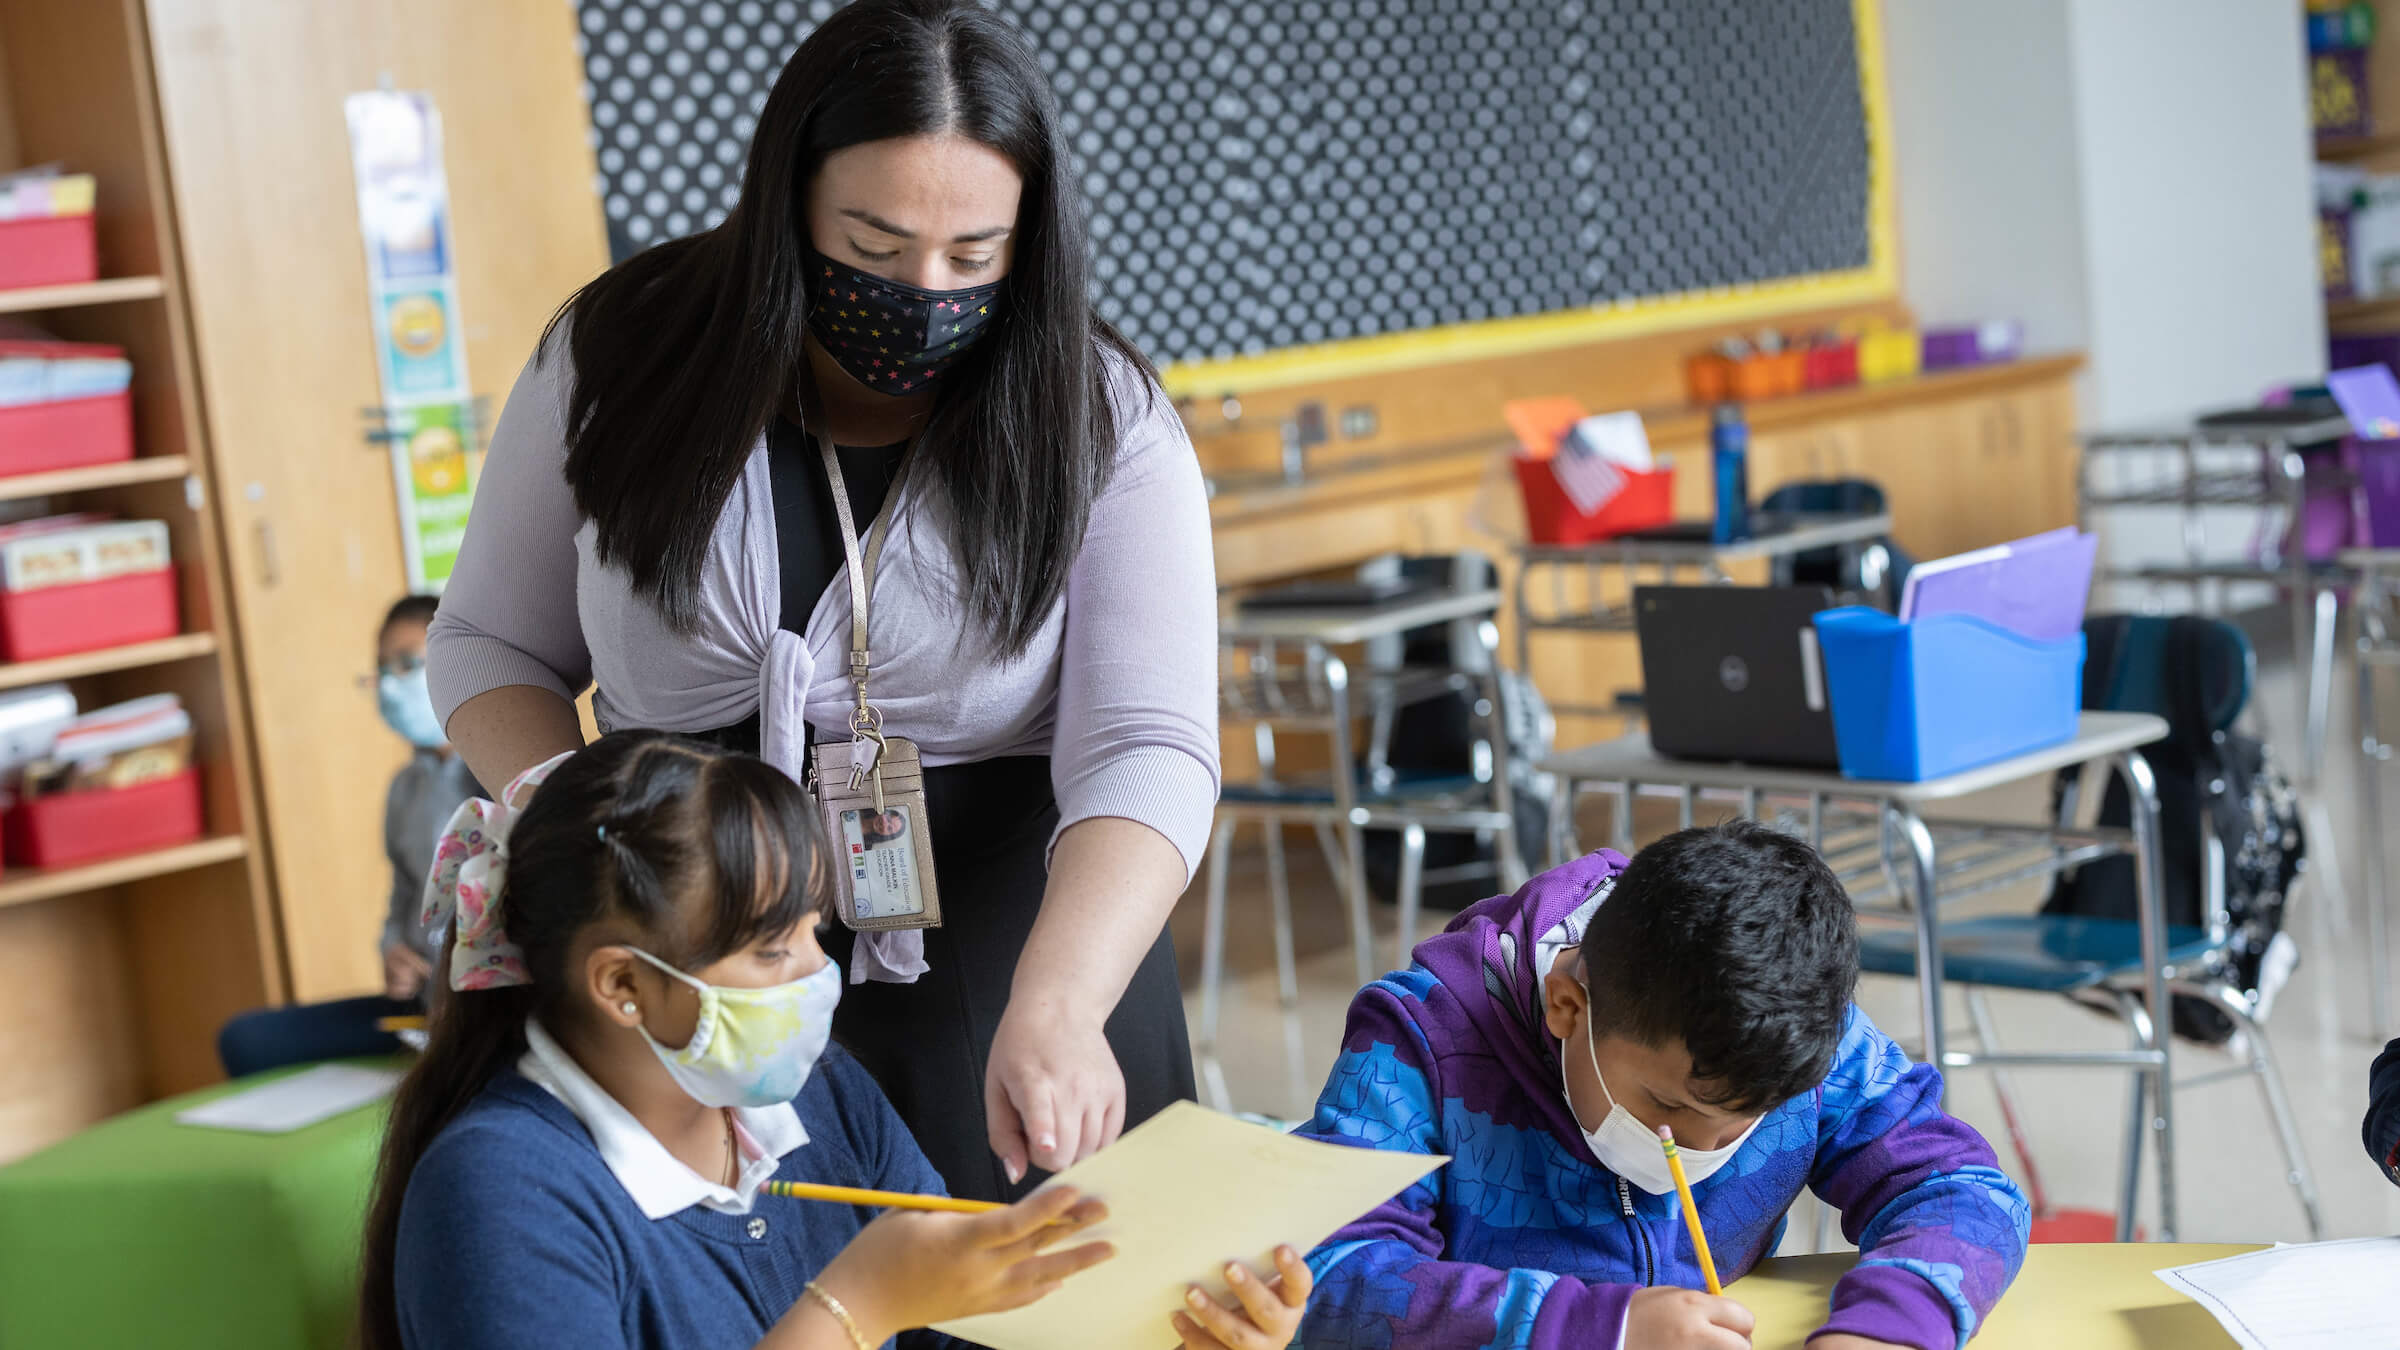 enna Malkin teaching in her classroom with two students with masks on